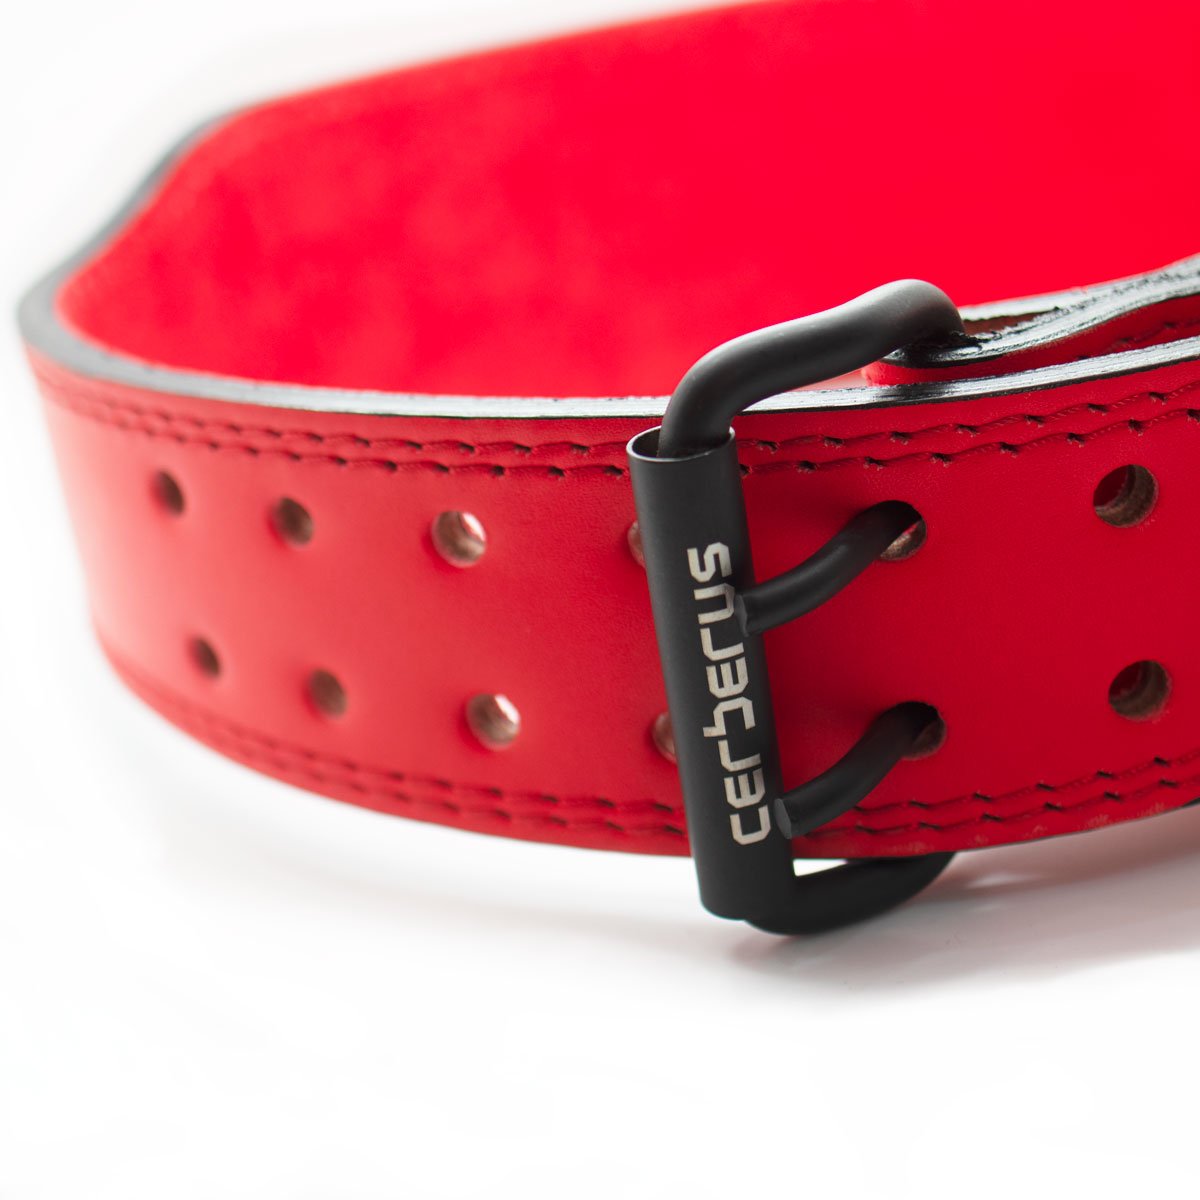 2 to 2-3/4 Heavy Duty Tapered Width Leather Belt